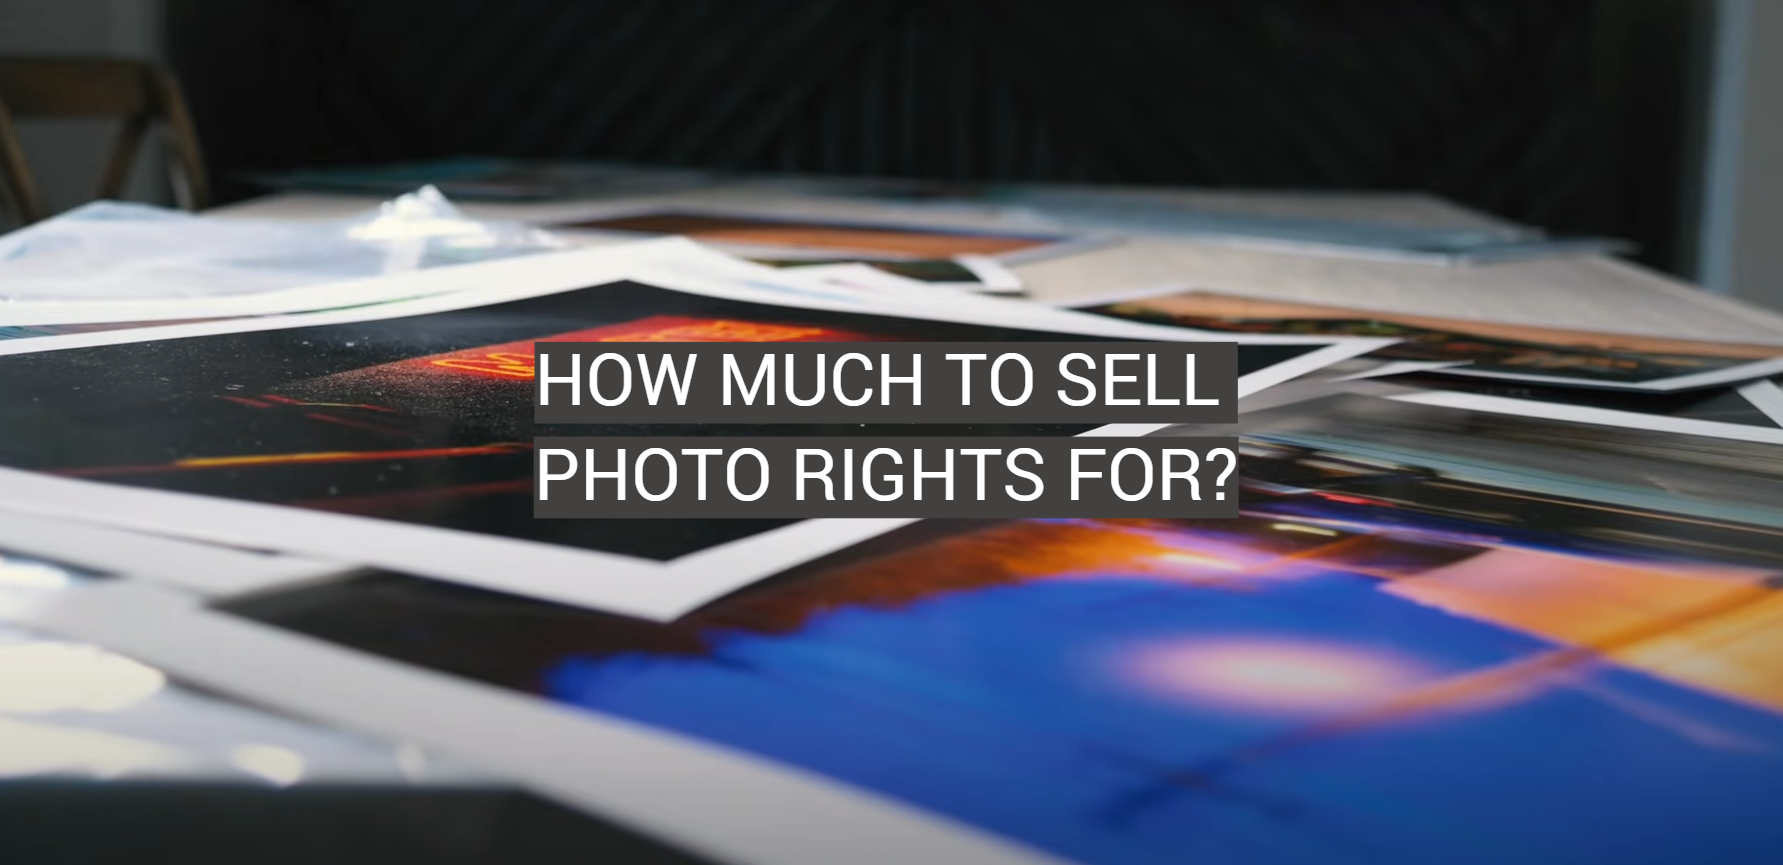 How Much to Sell Photo Rights For?